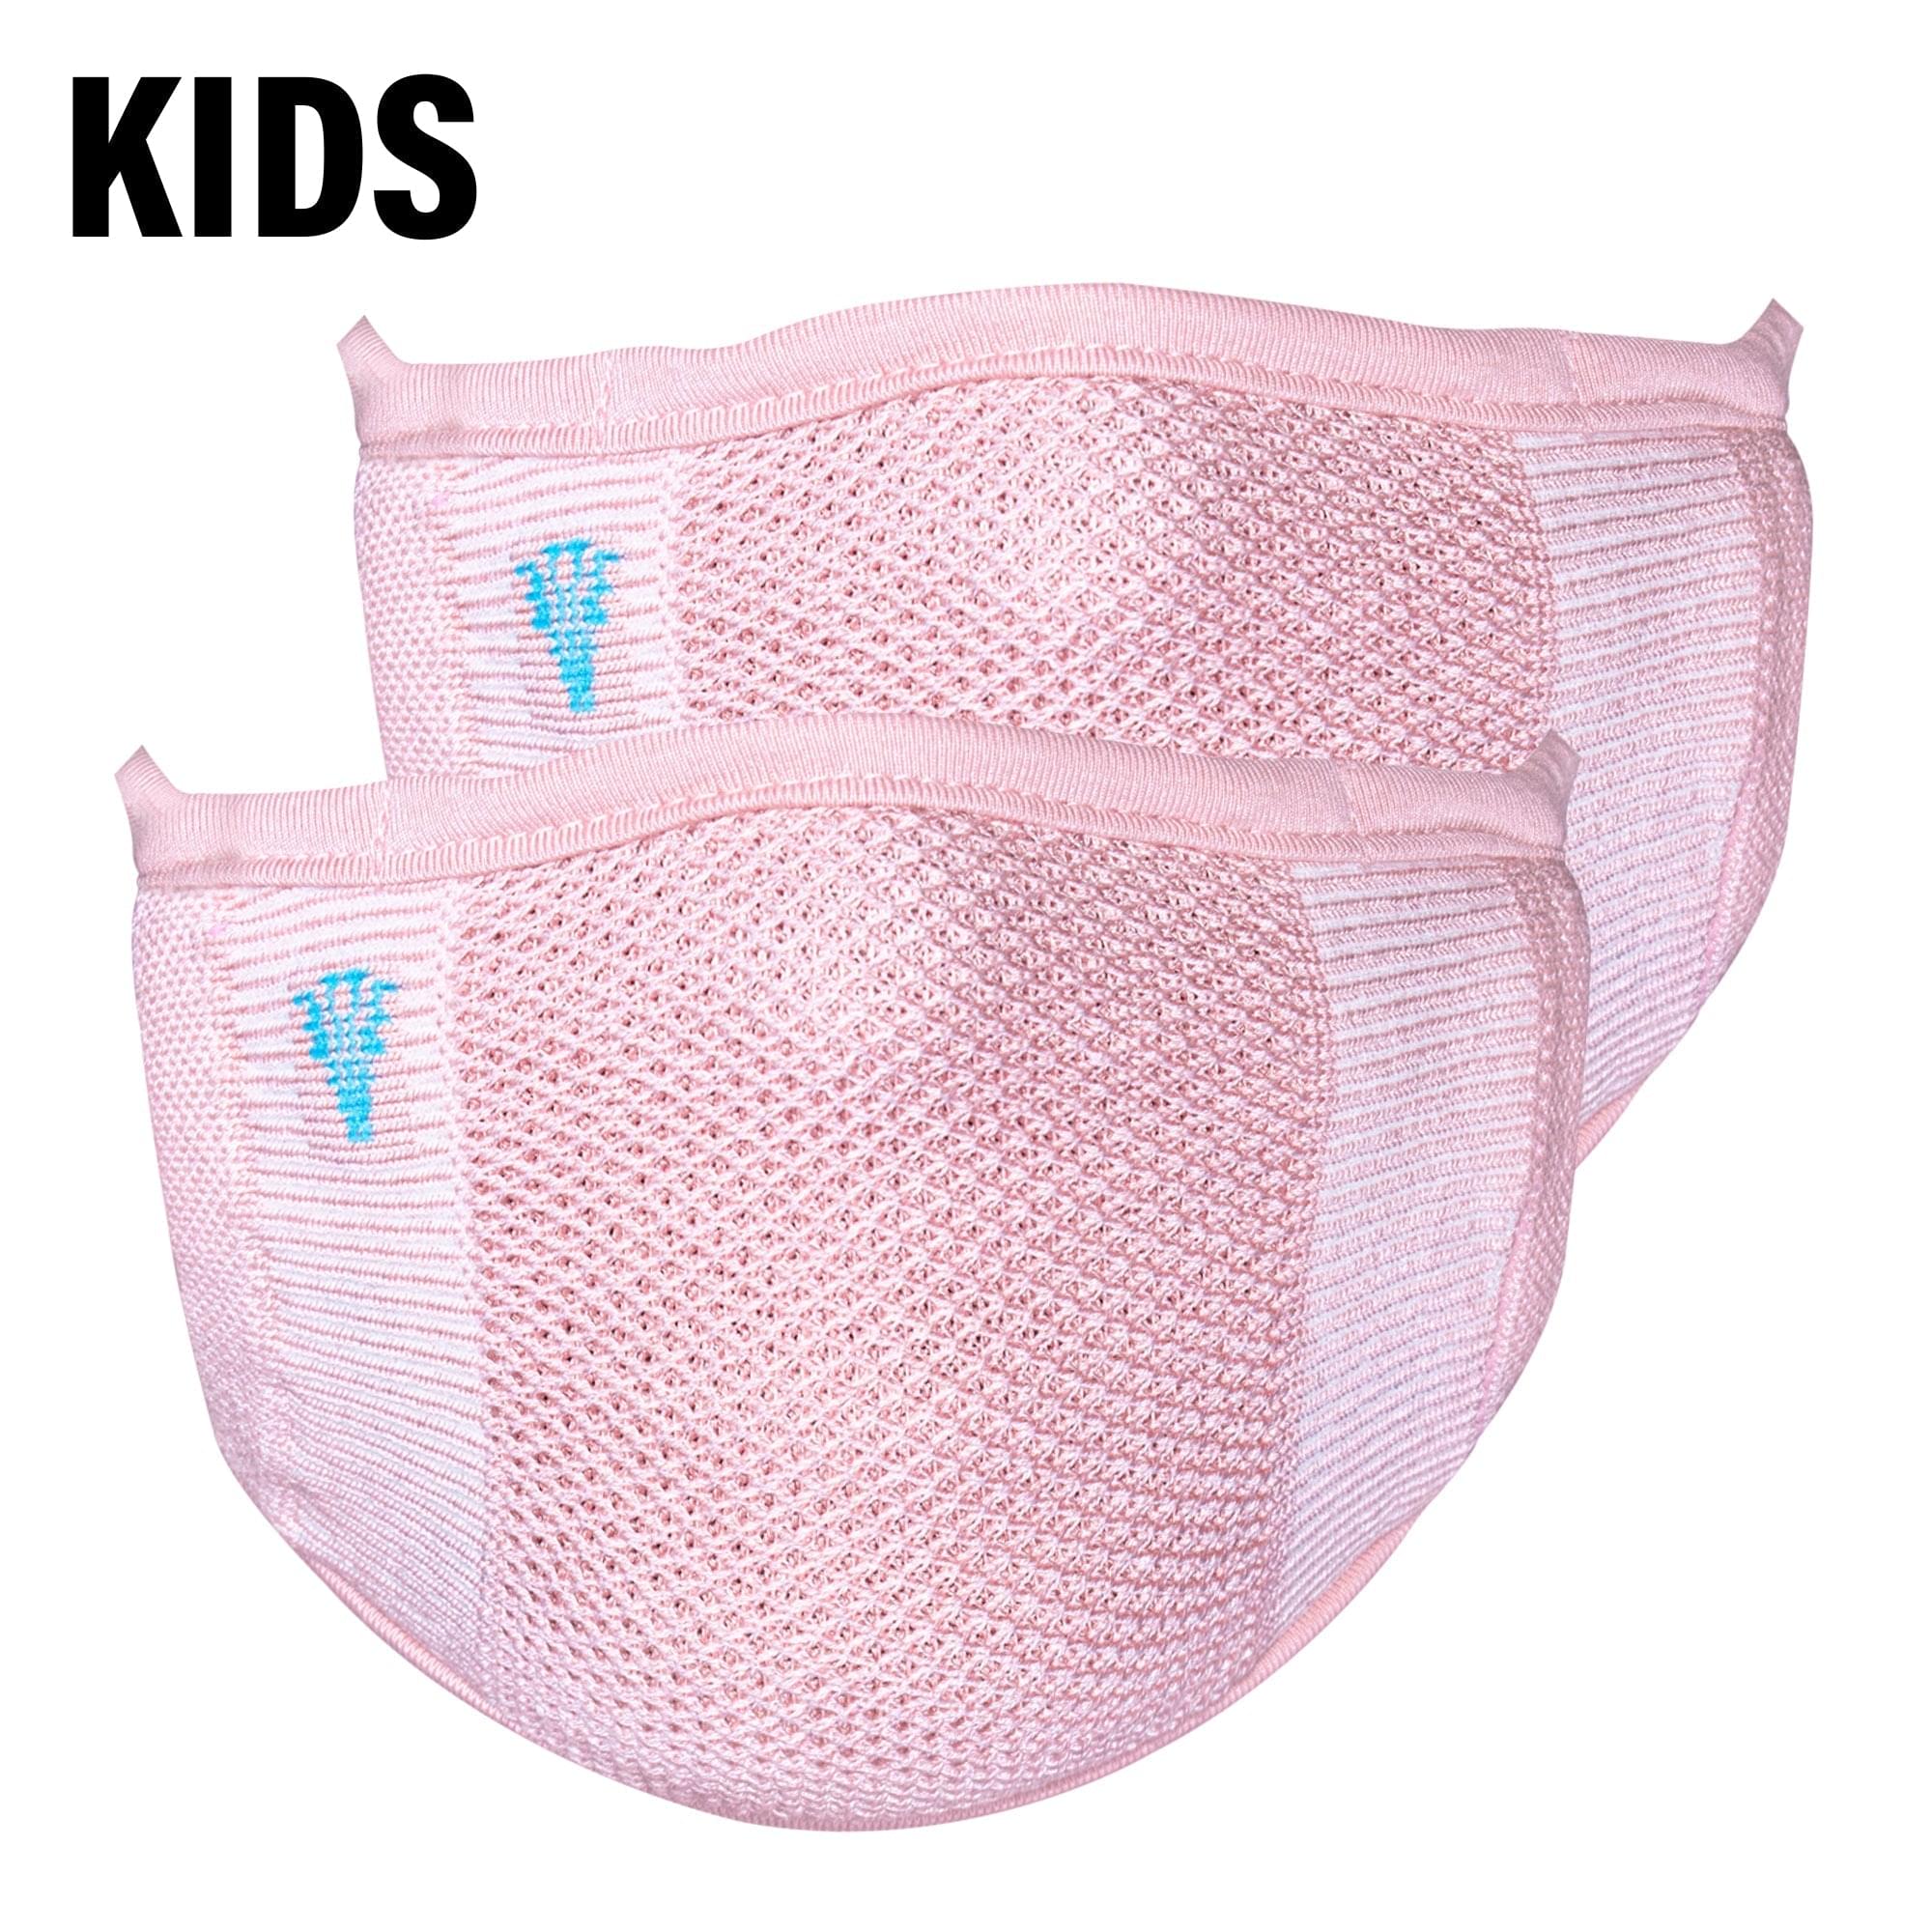 2-Layer Anti-Bacterial Protection Mask for Kids, Fashion Coloured -Size - Medium (8-12 Yrs) - Pack of 2